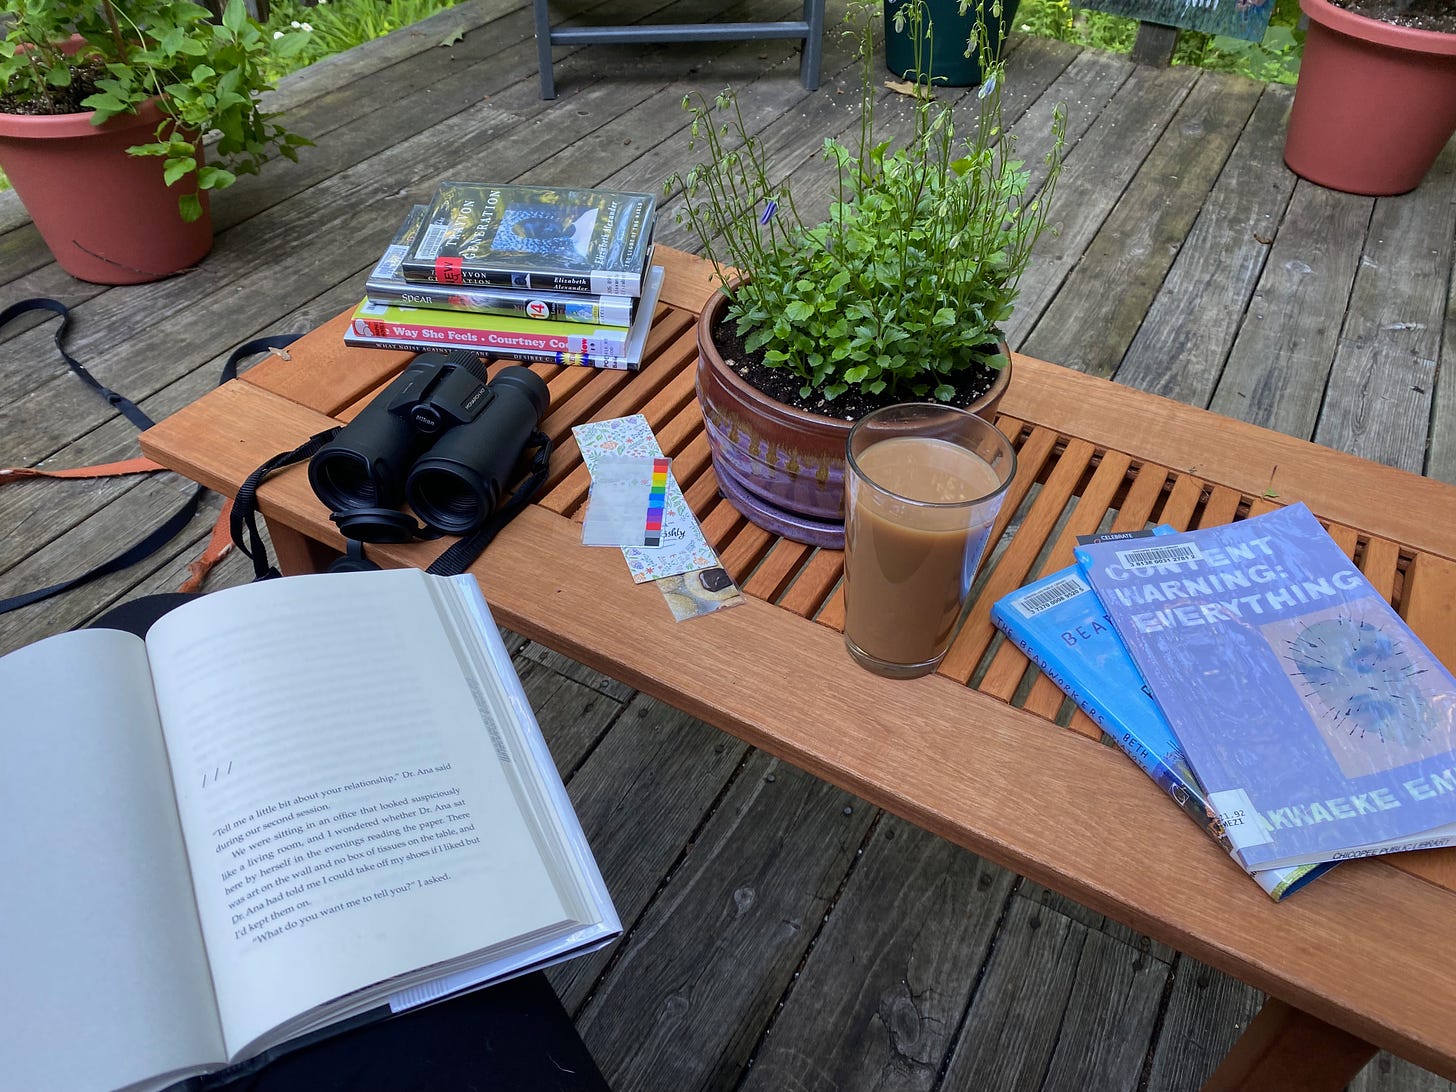 A wooden coffee table on a porch filled with stacks of books, a glass of iced tea, bookmarks, binoculars, and a potted plant. Other potted plants on the porch are visible in the background. A book is open on my knee, partially visible.